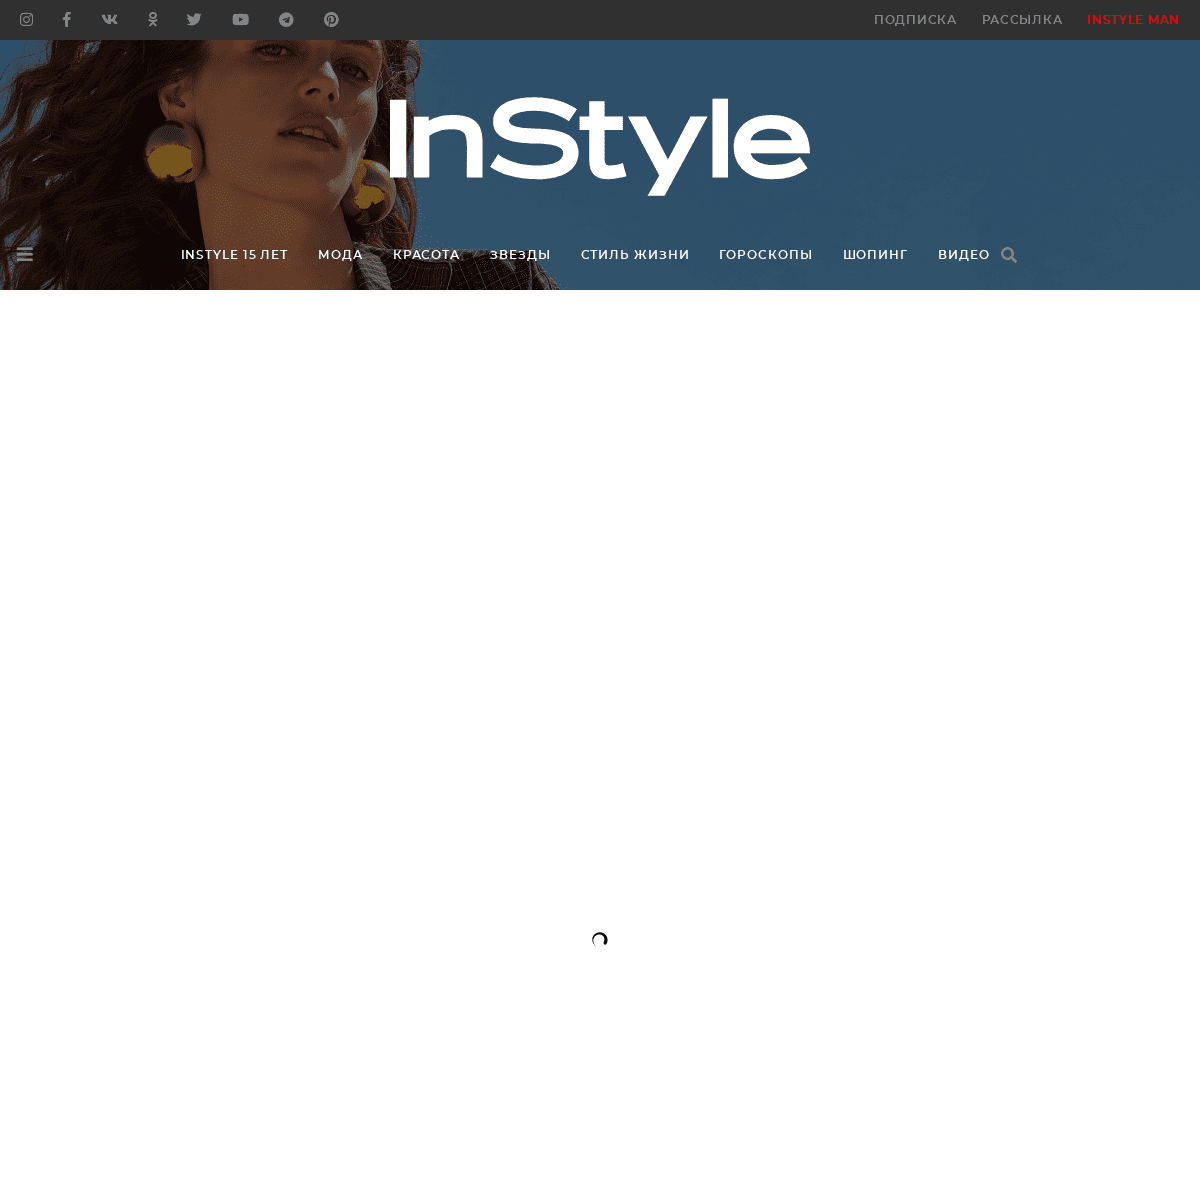 A complete backup of https://instyle.ru